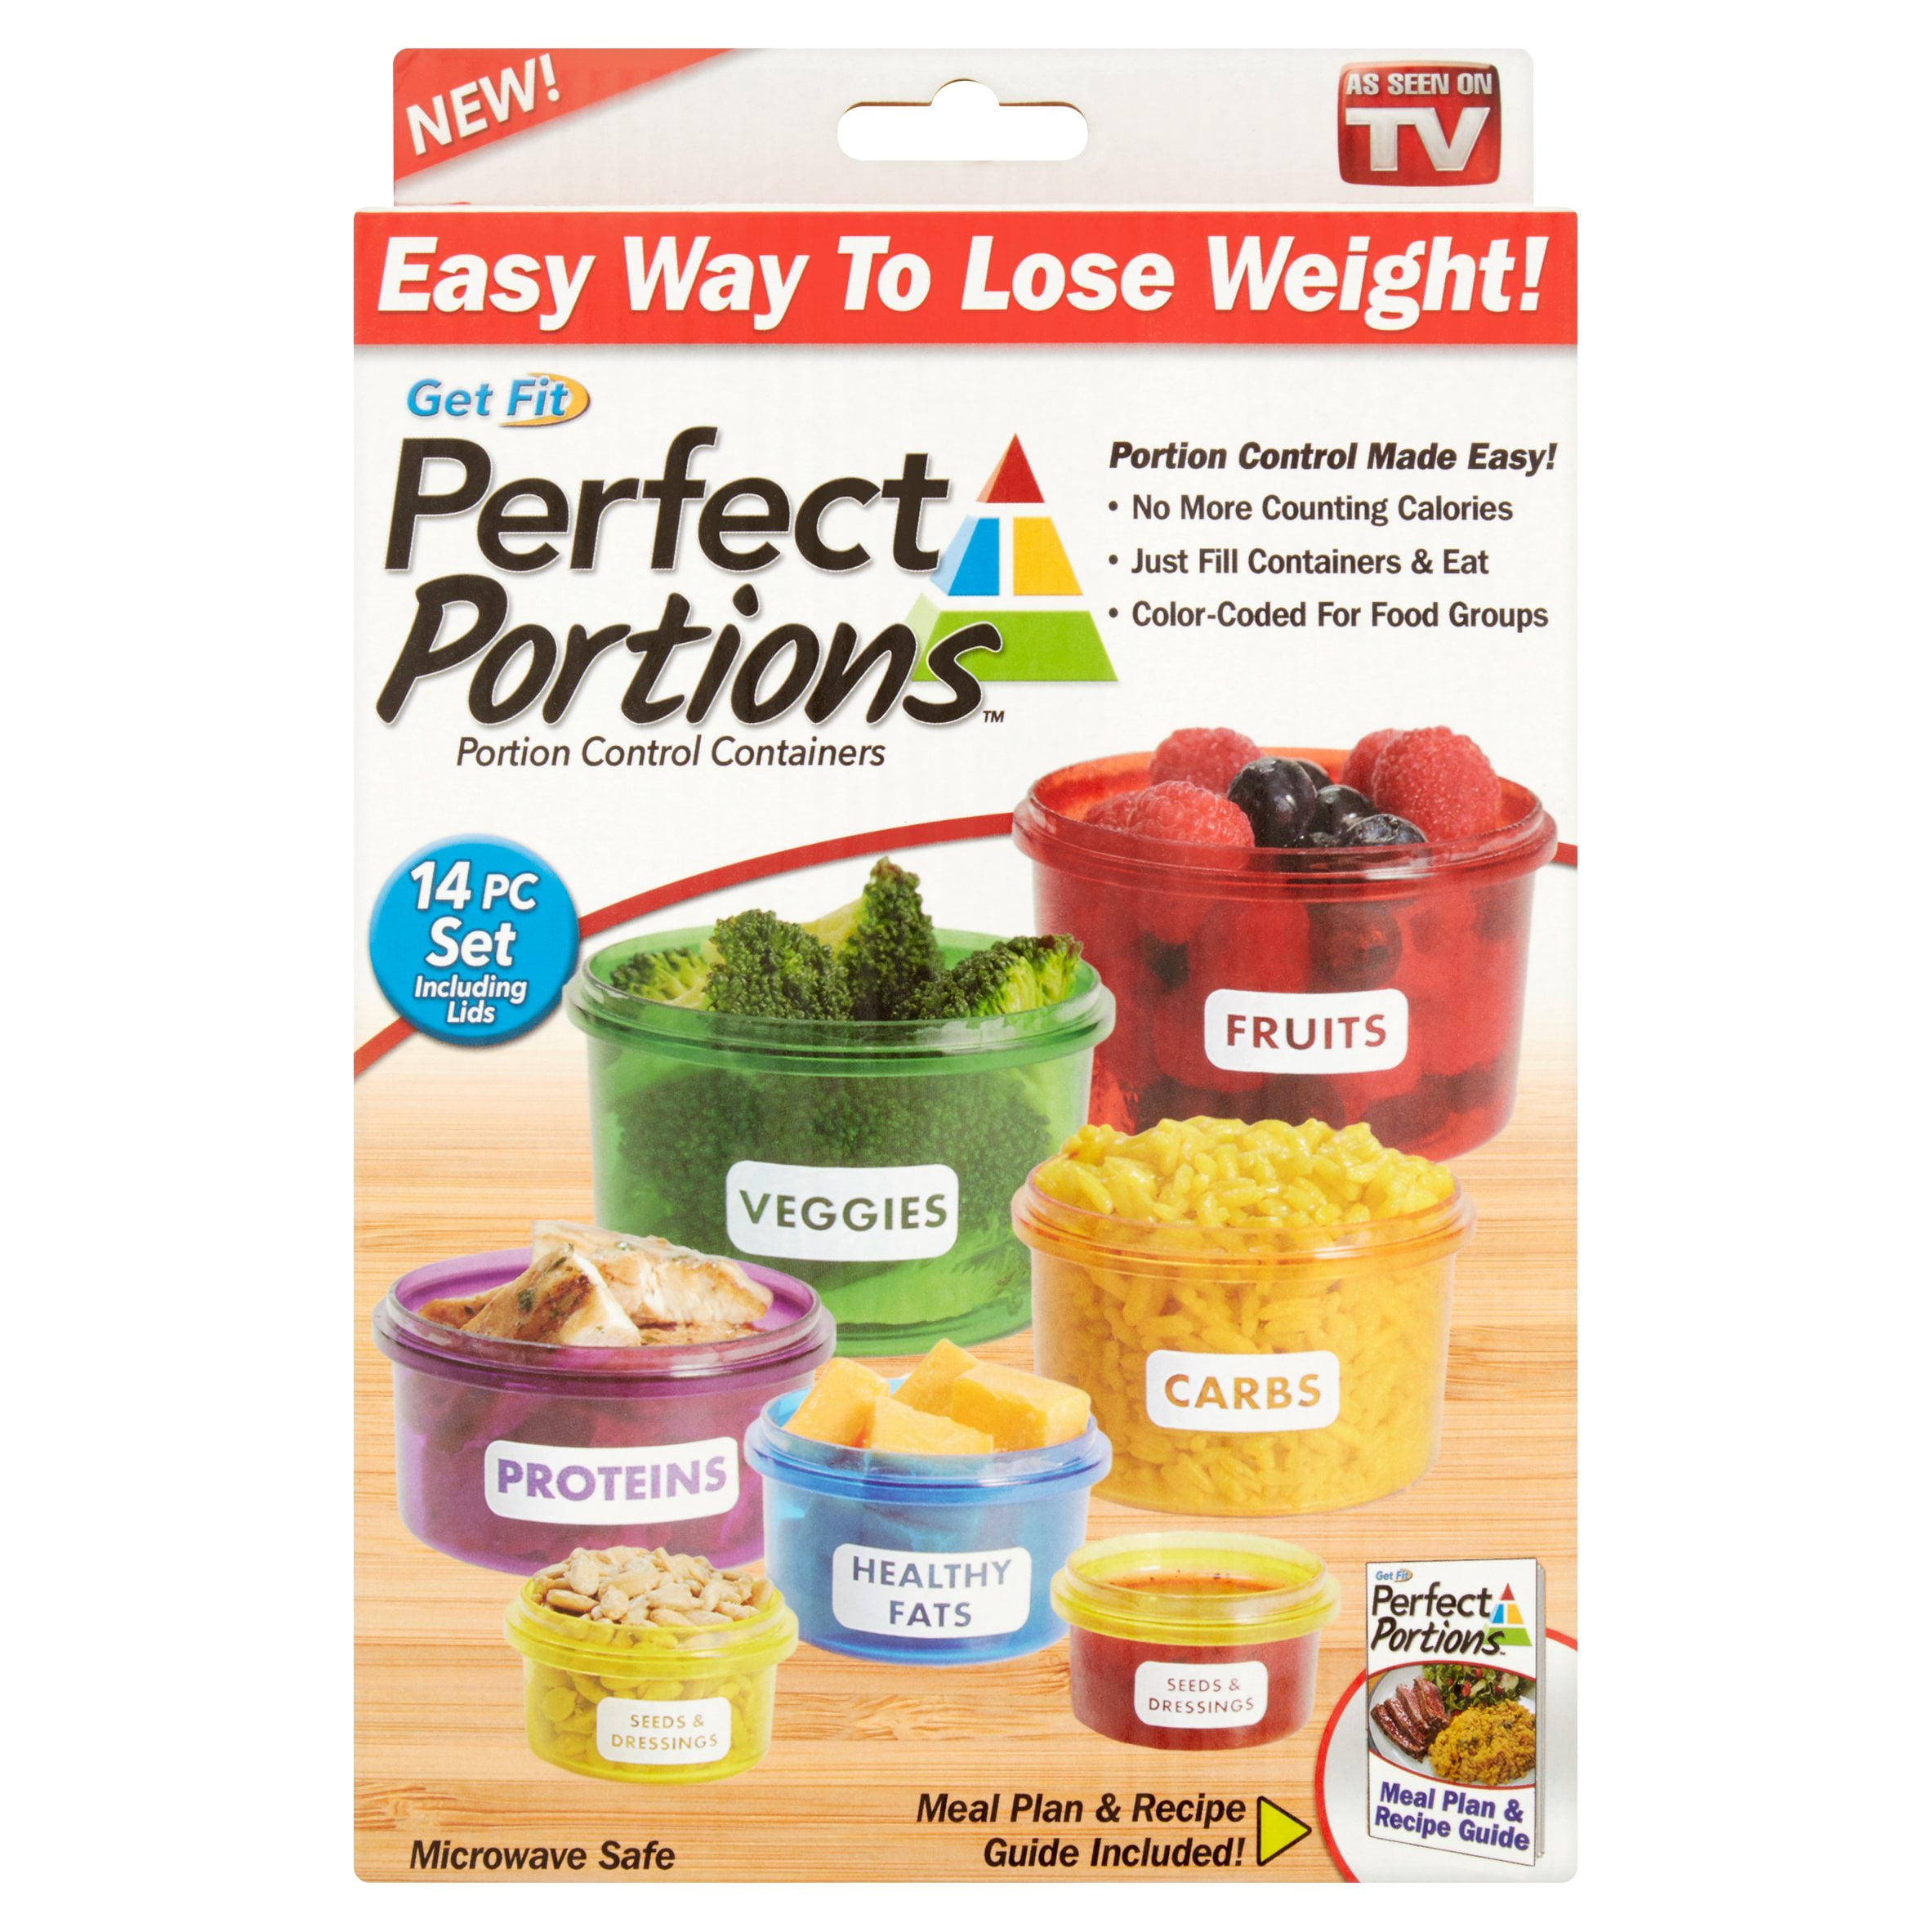 14pc Portion Control Set with Guide